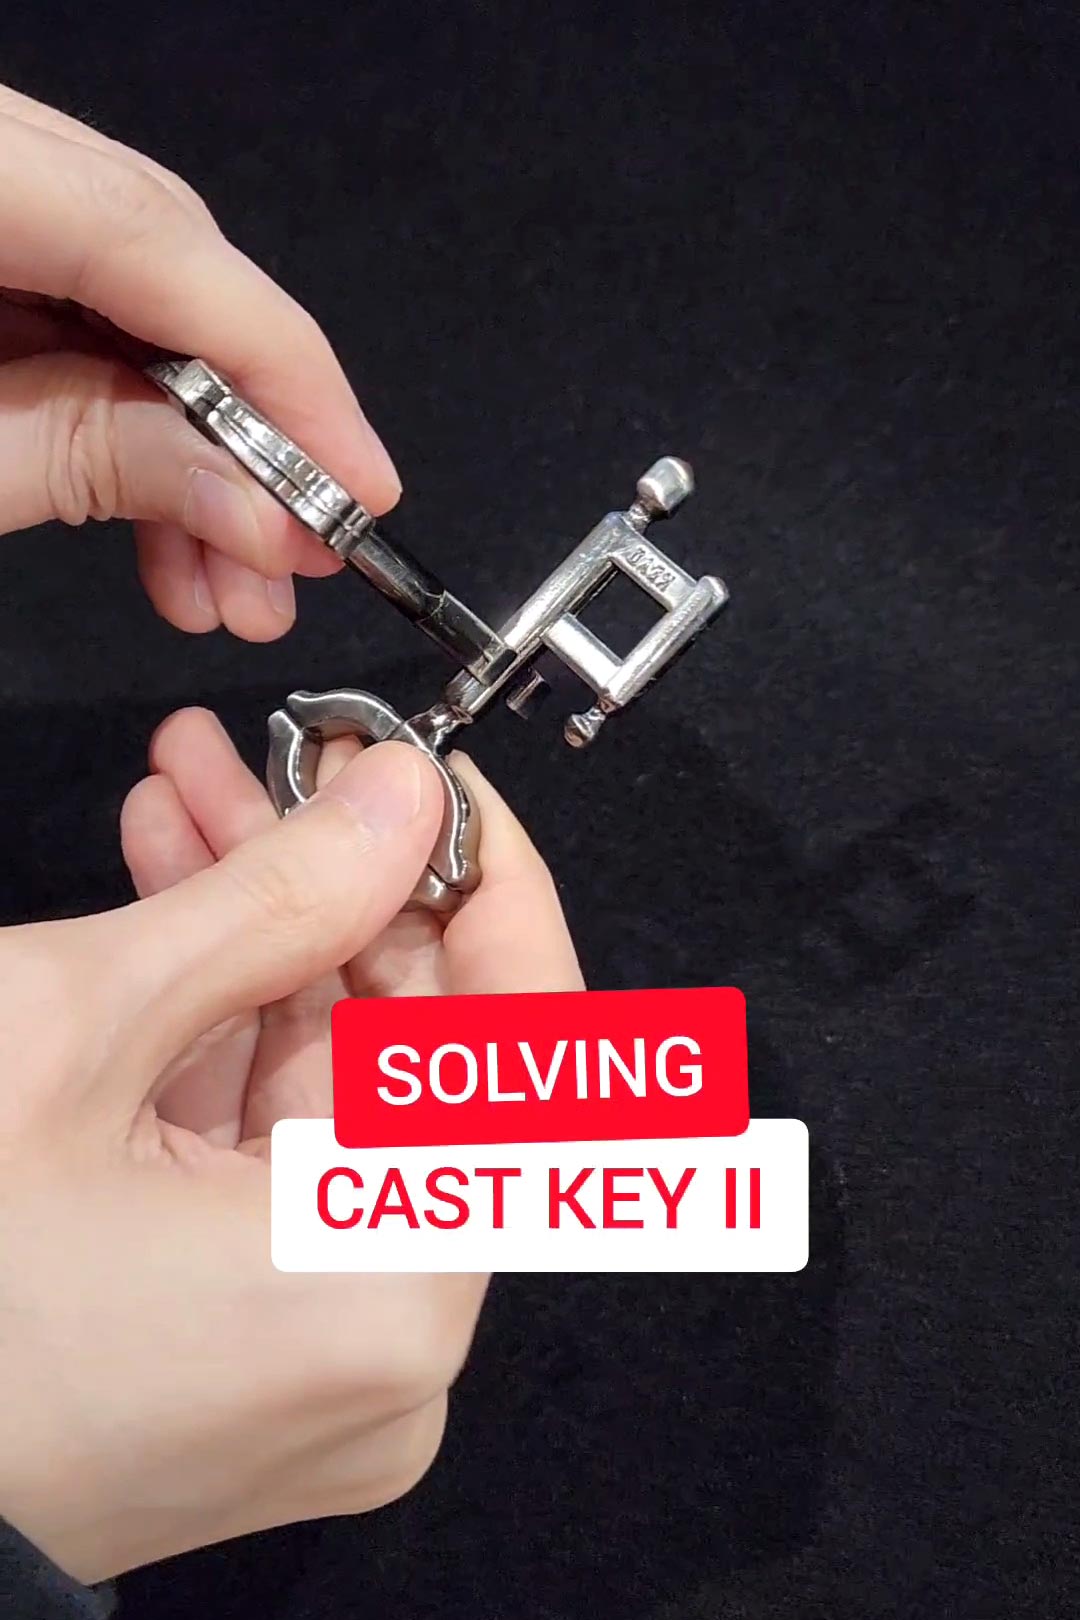 How to solve the Cast Key II Puzzle